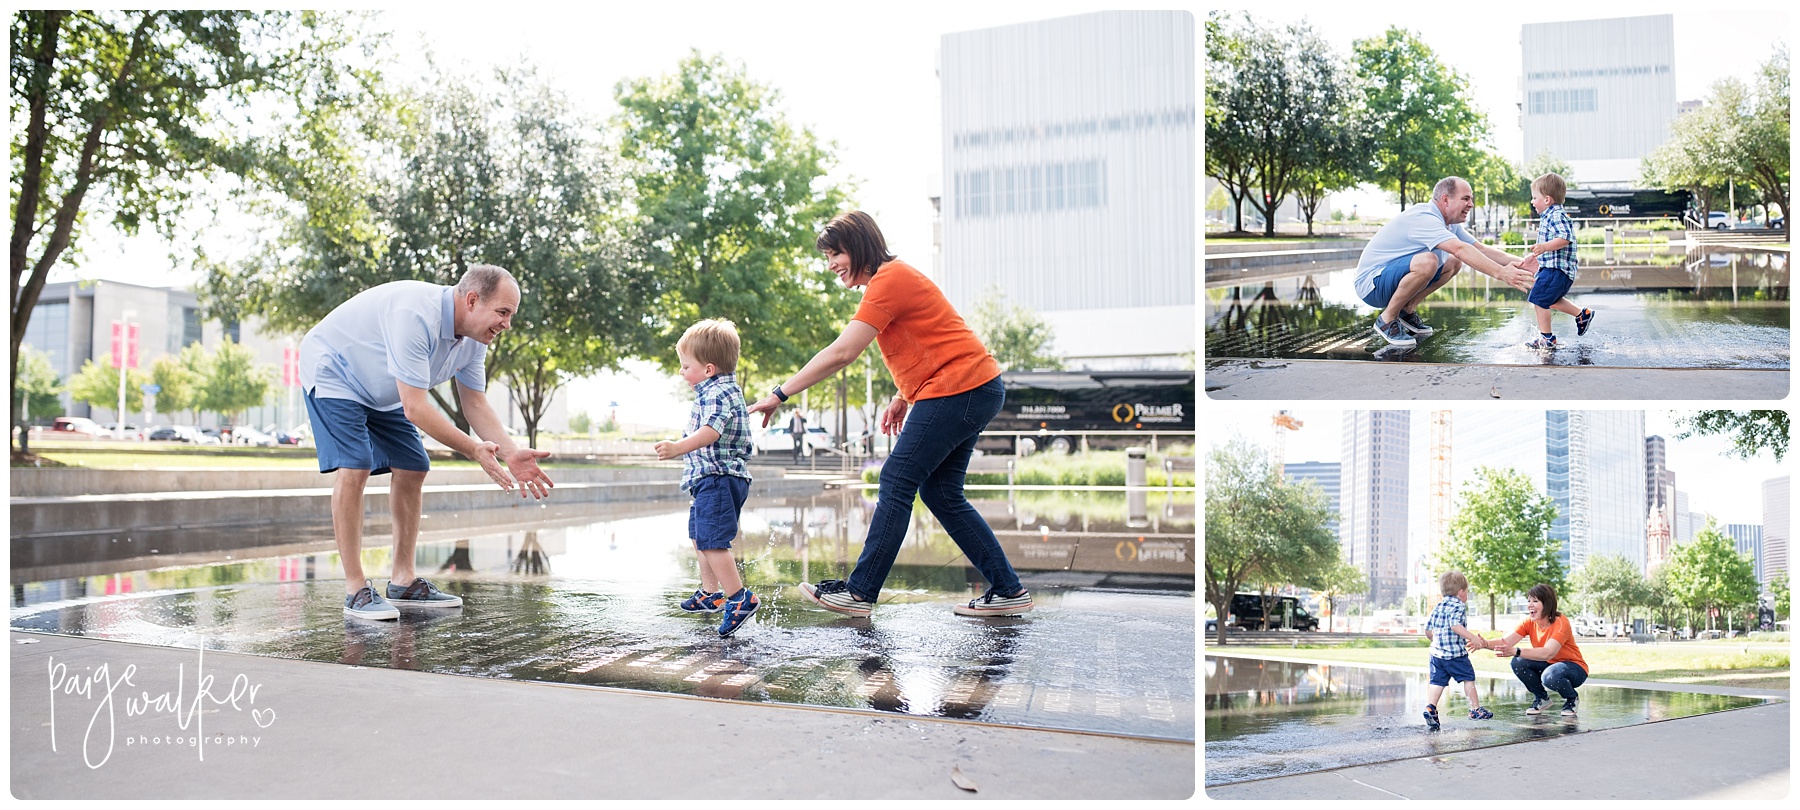 mom and dad playing with their son in a reflecting pool